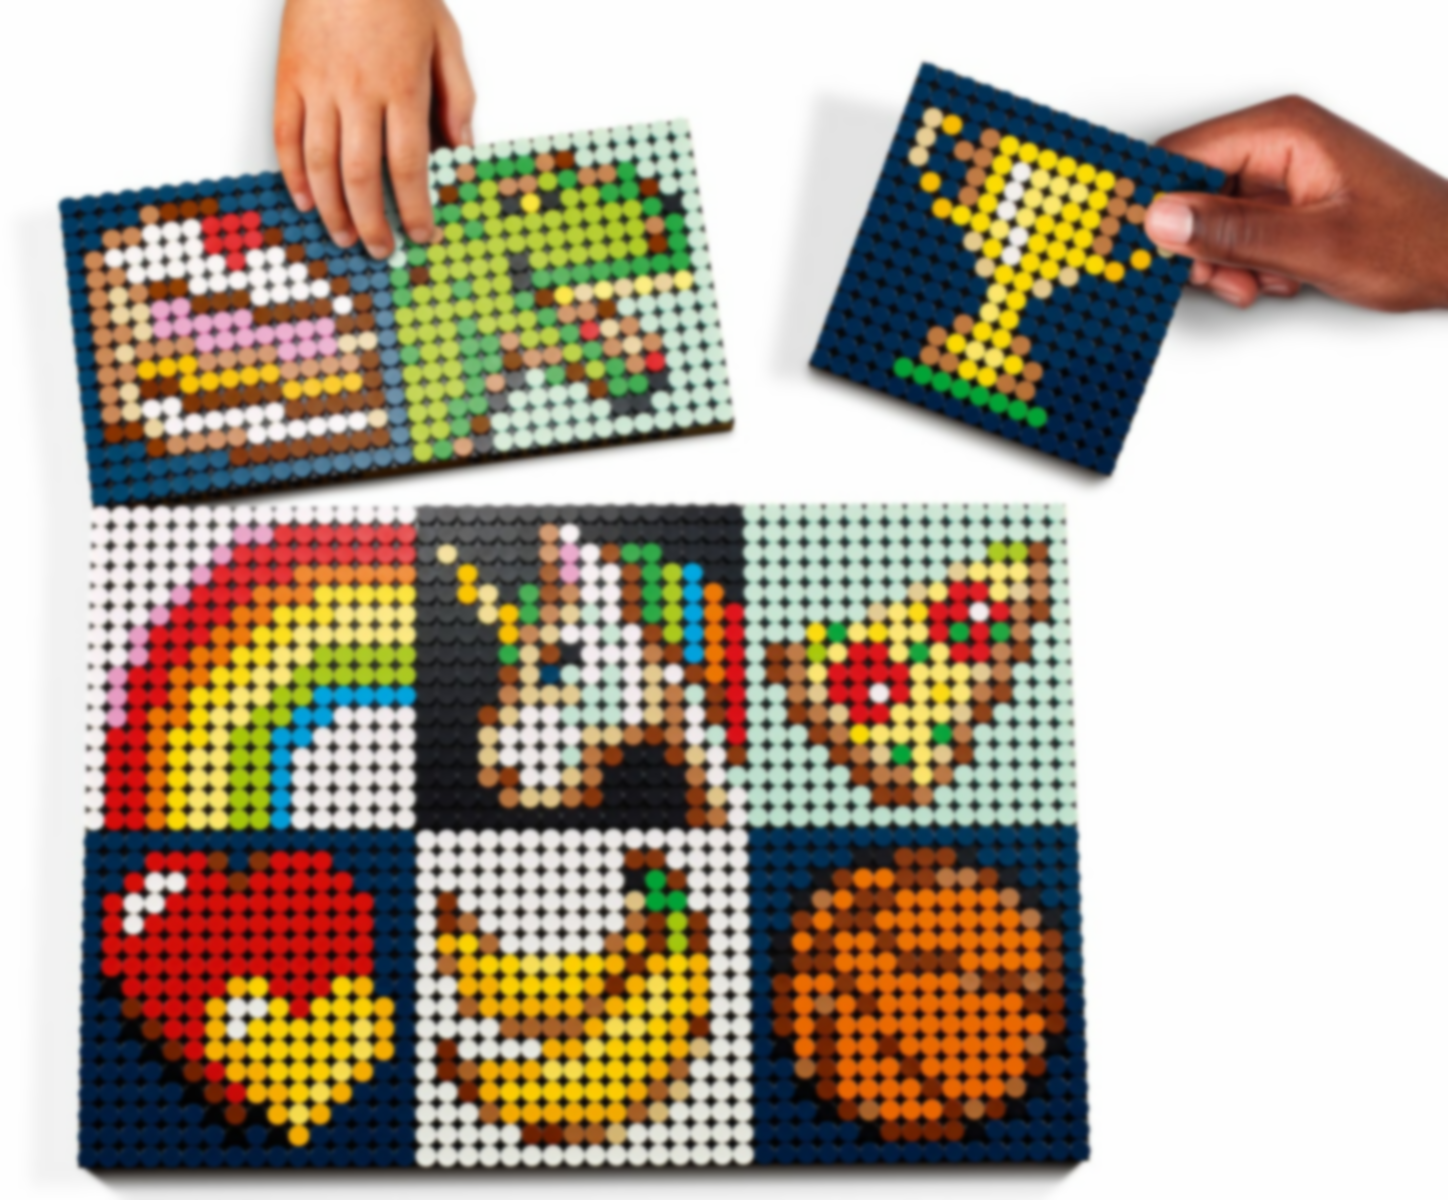 LEGO® Art Art Project - Create Together components